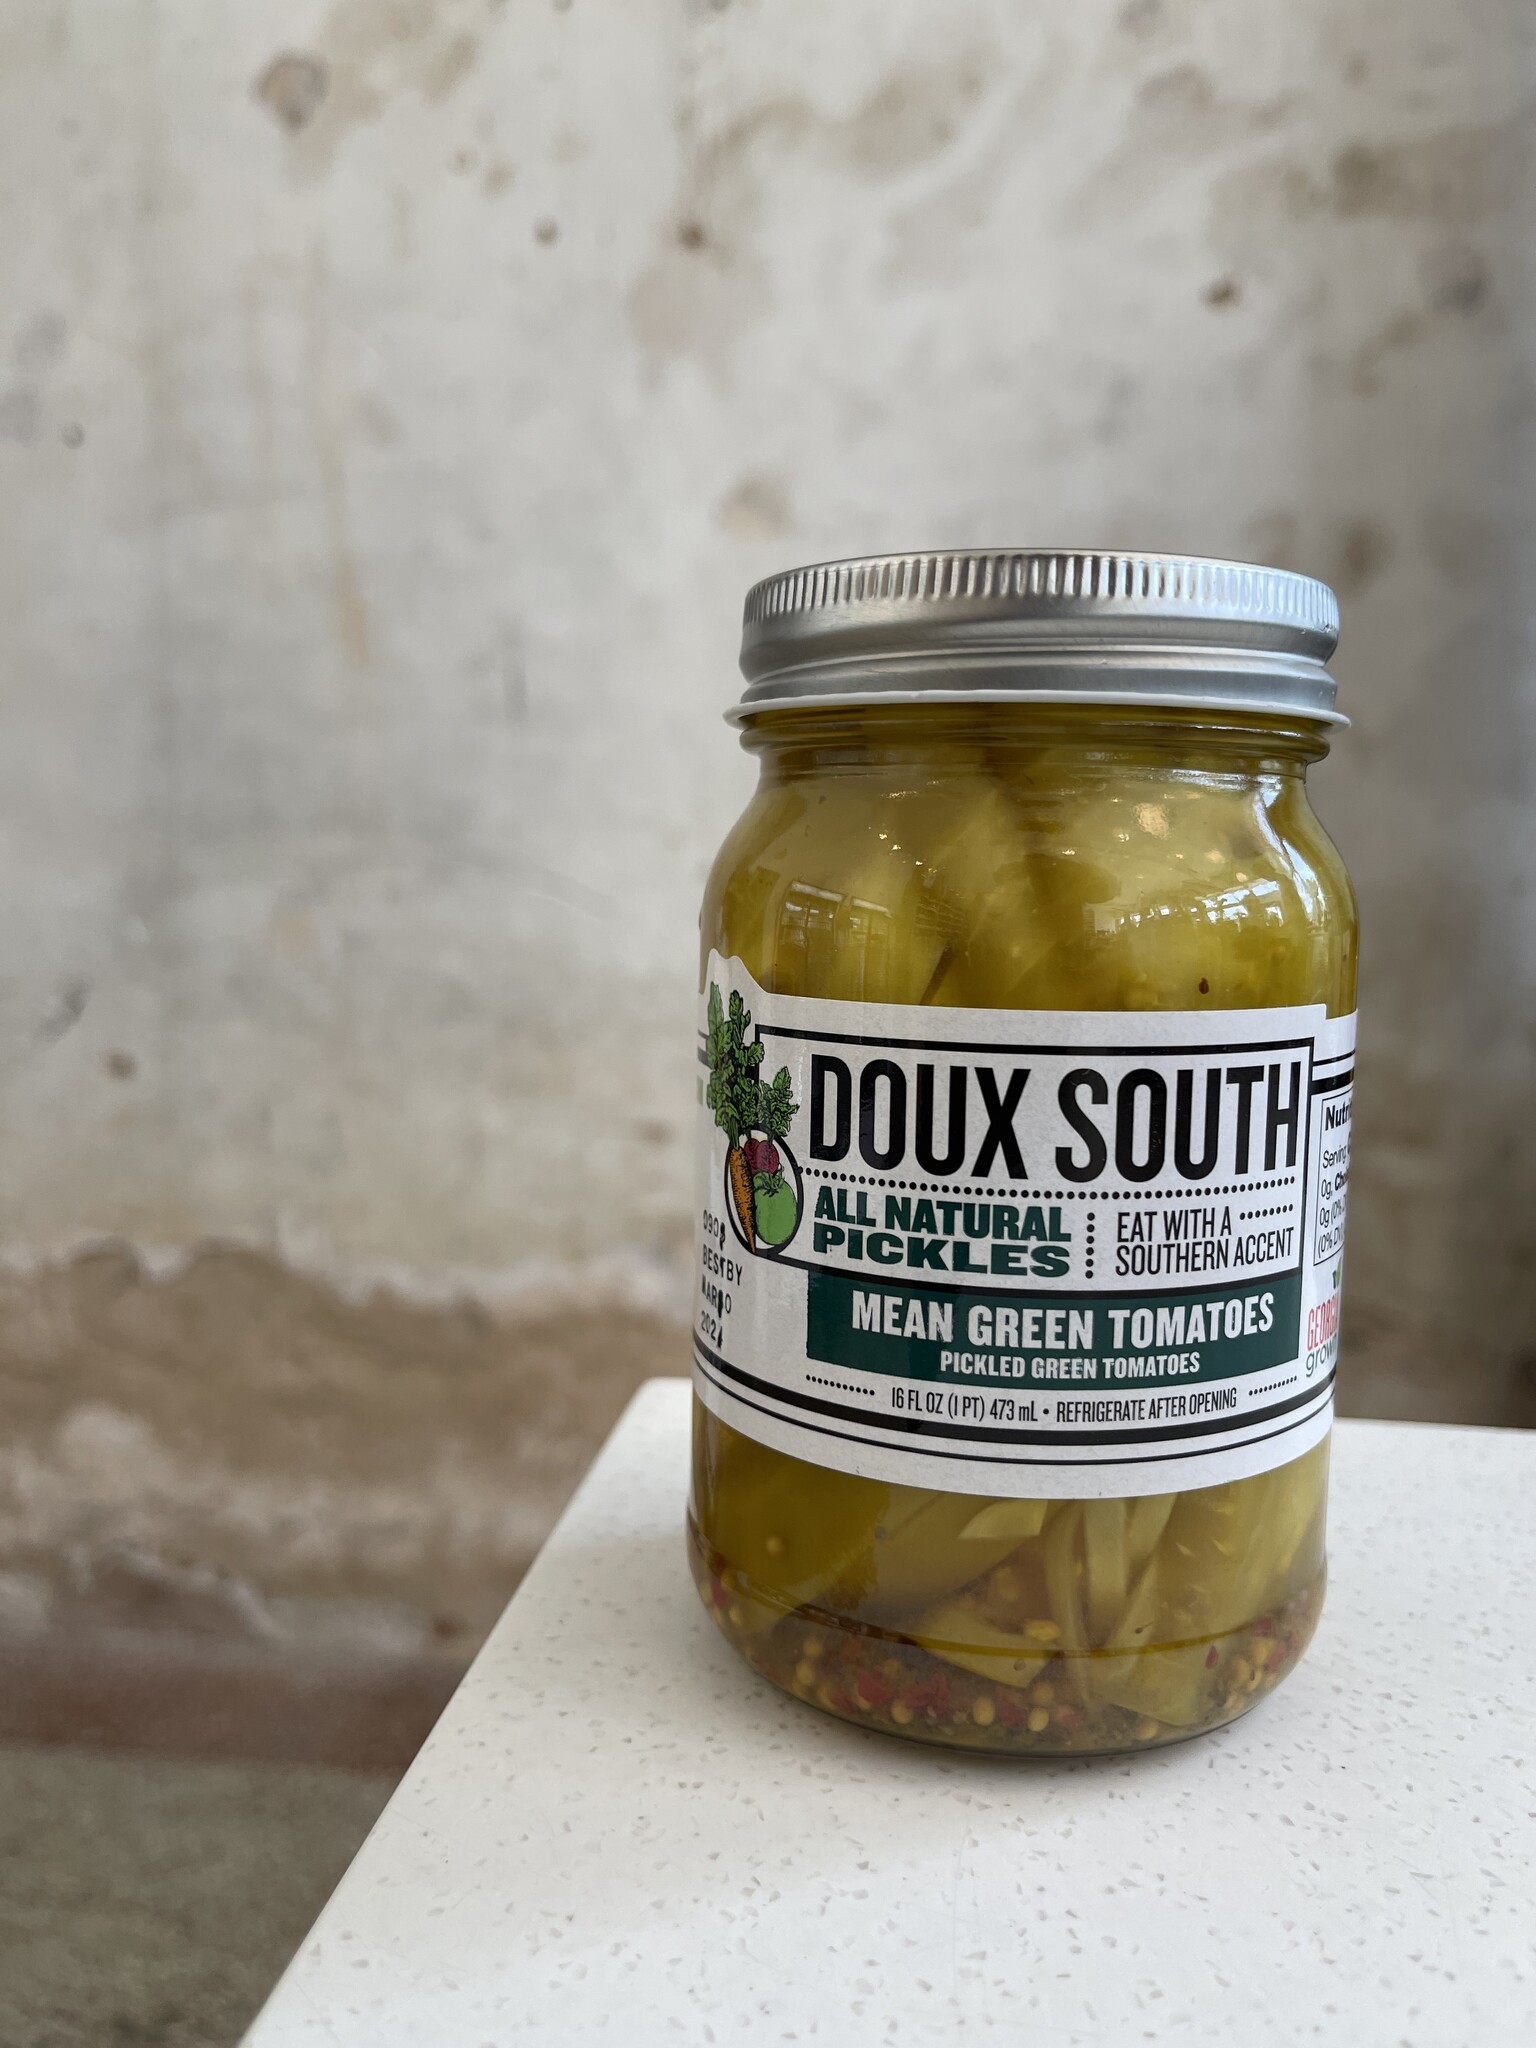 Doux South Mean Green Tomatoes 16oz